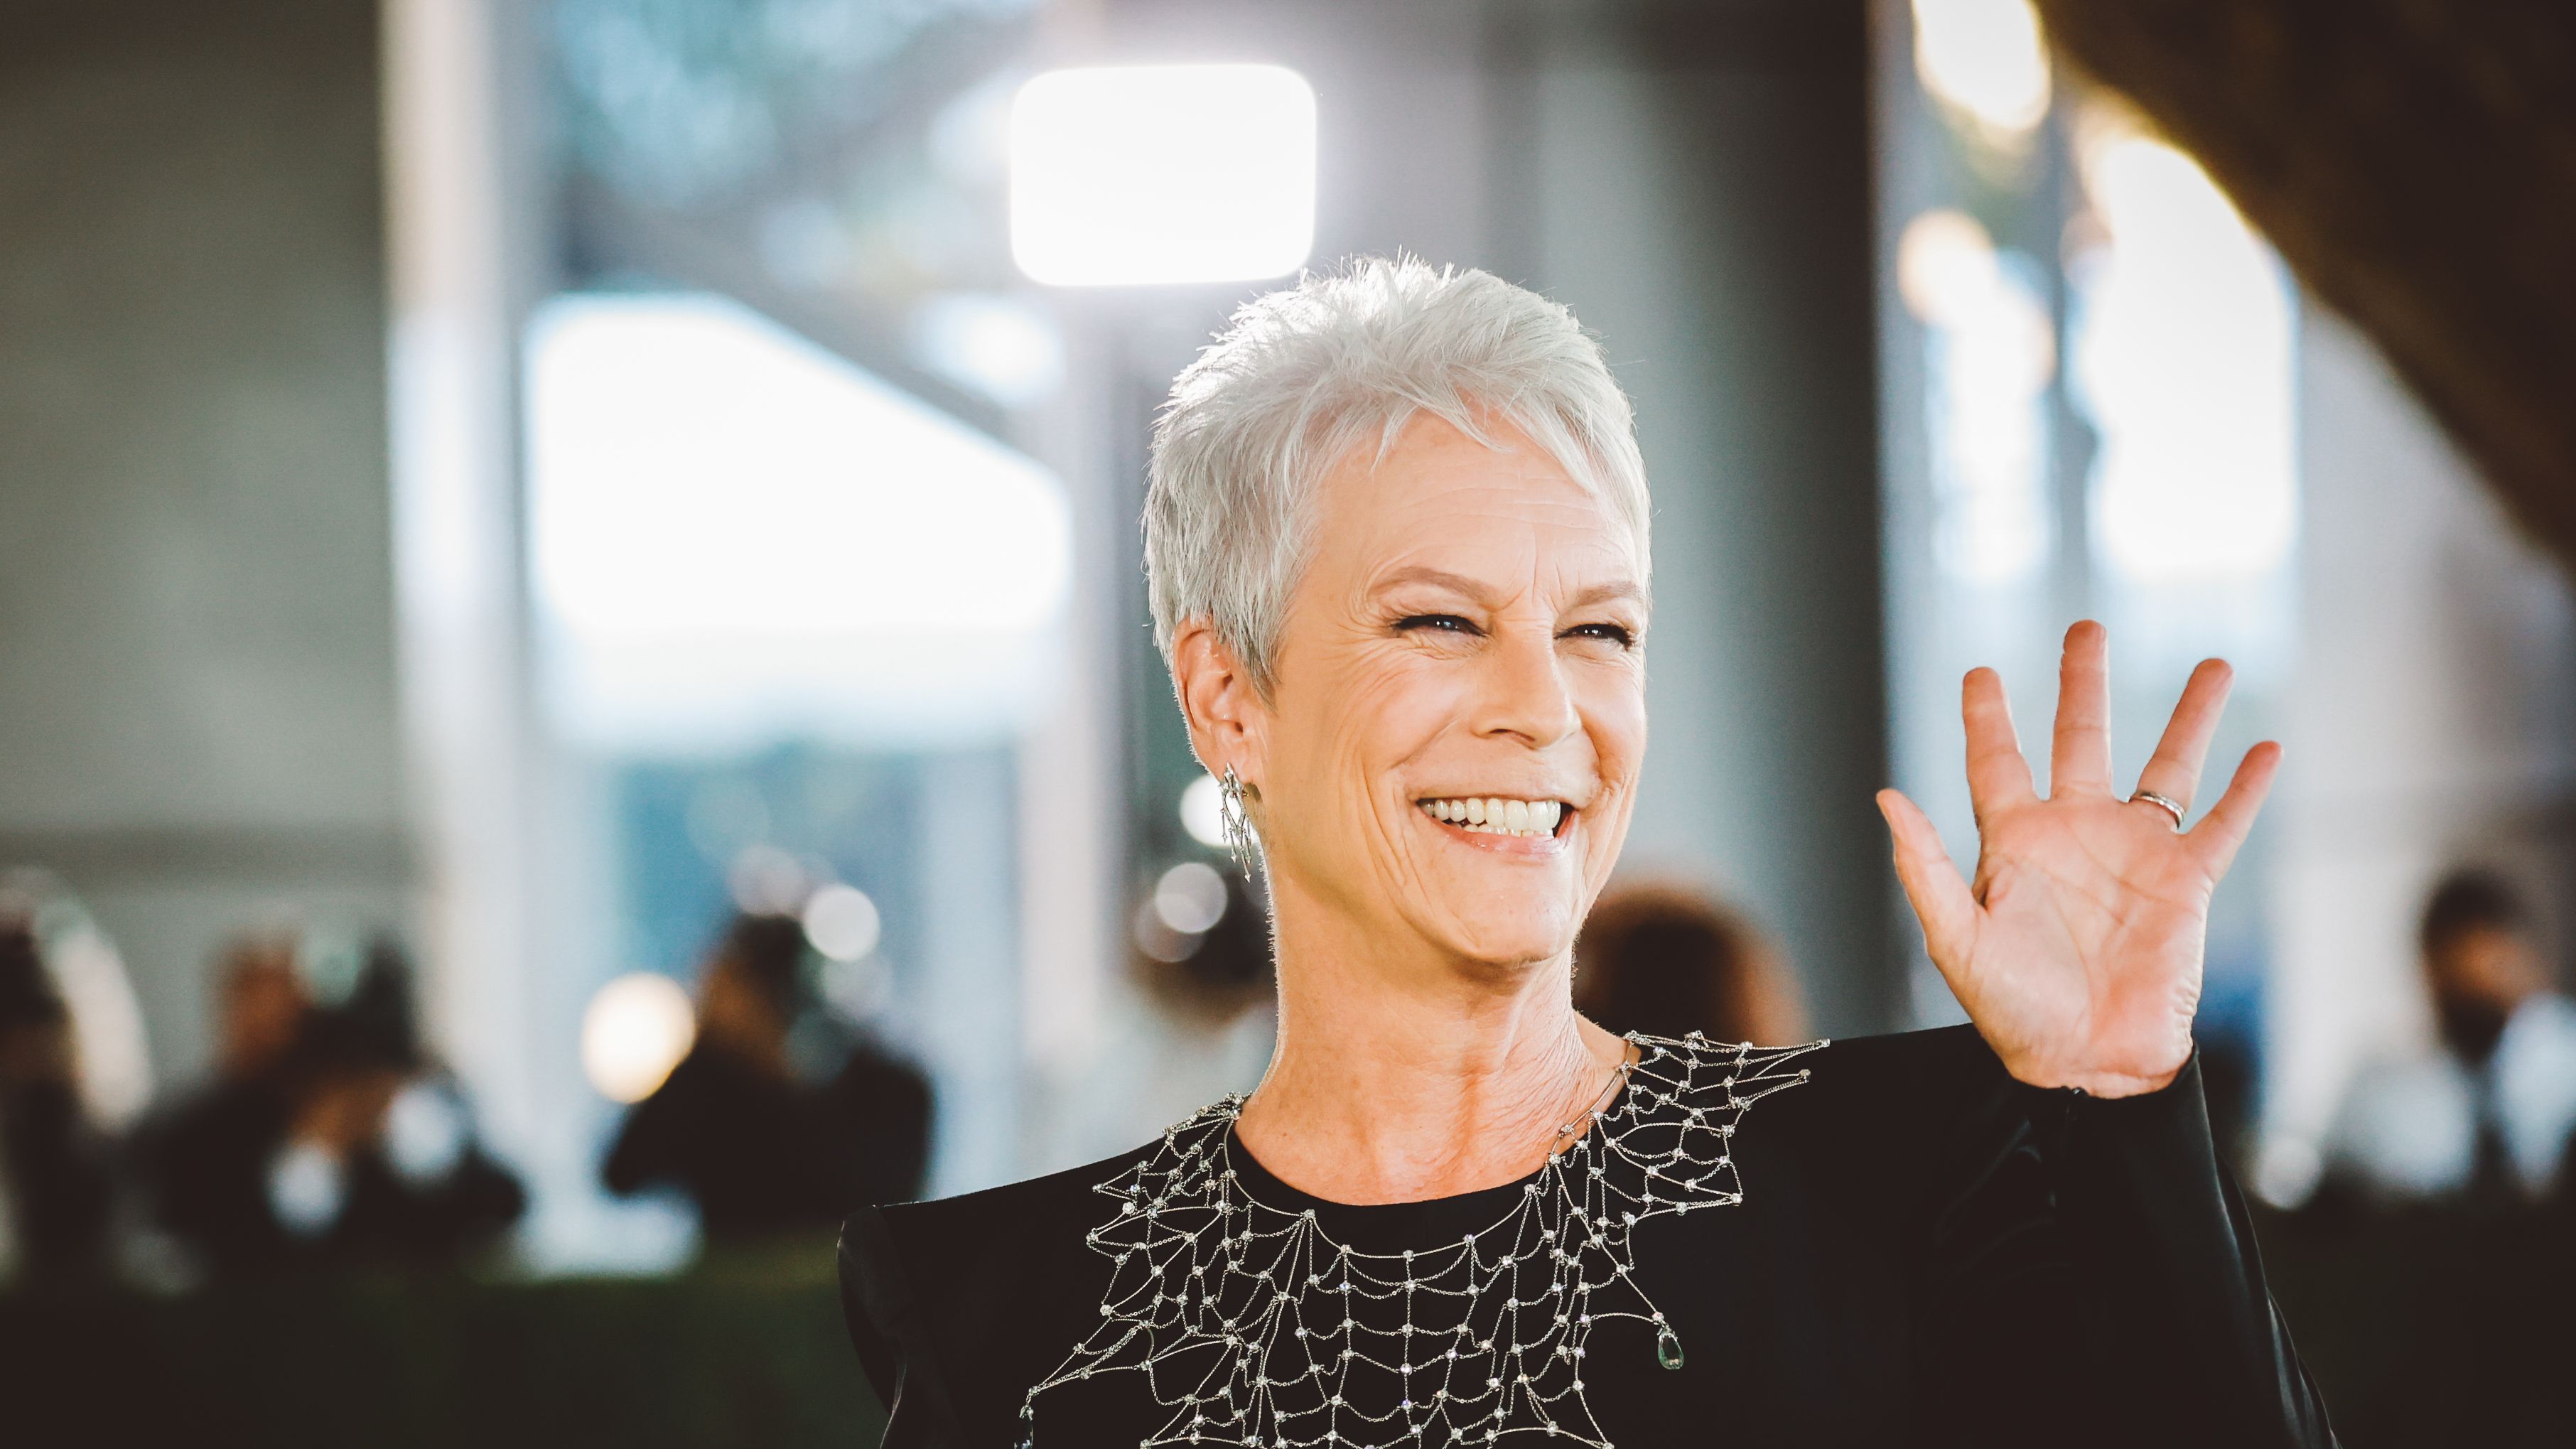 Jamie Lee Curtis, 63, is Not Worried About Aging in Hollywood